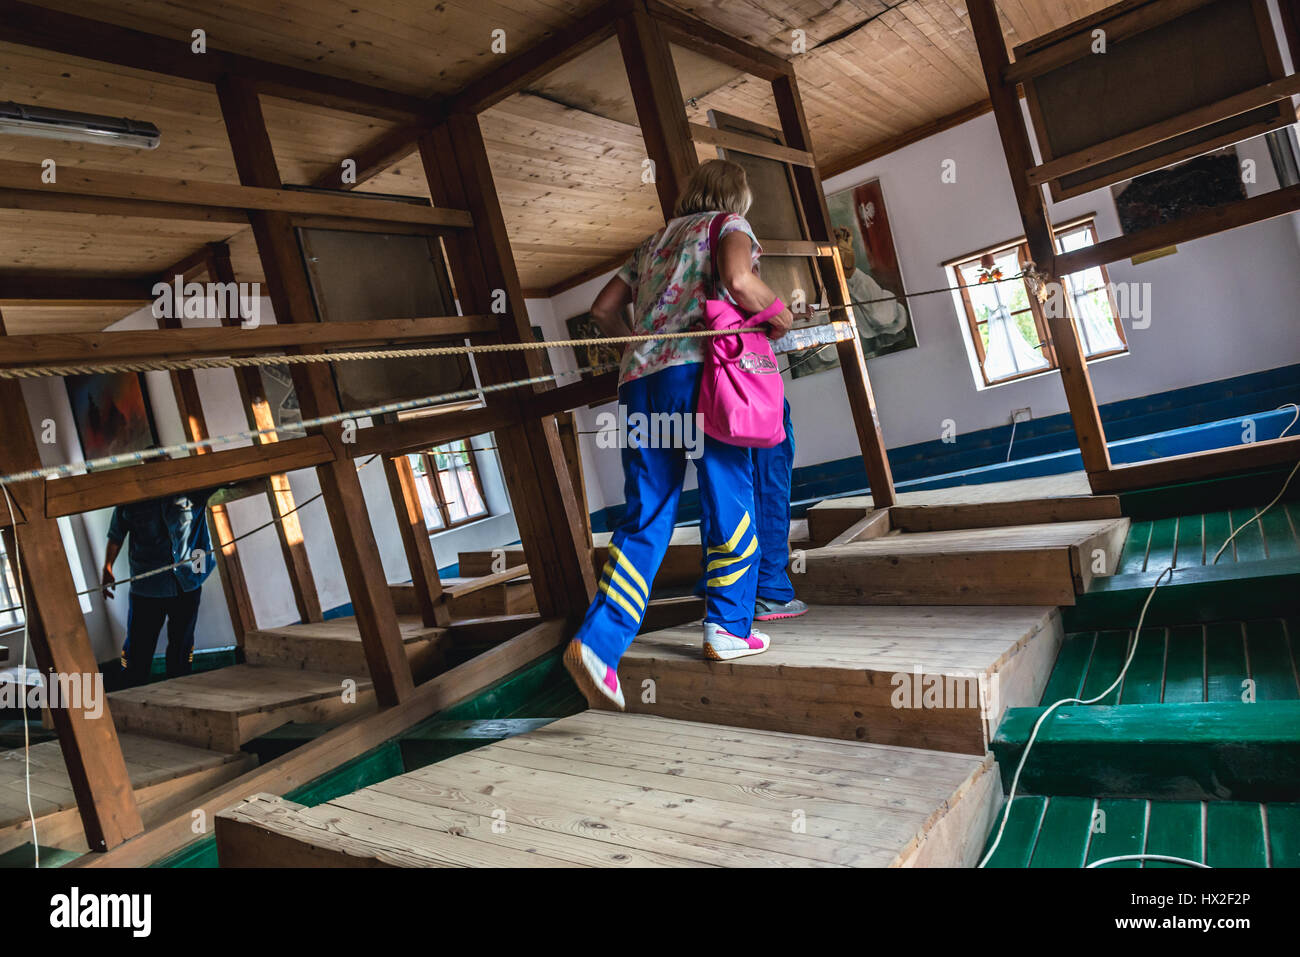 Inside the Upside-Down House in Centre for Education and Regional Promotion in Szymbark village, Kashubia region of Pomeranian Voivodeship in Poland Stock Photo